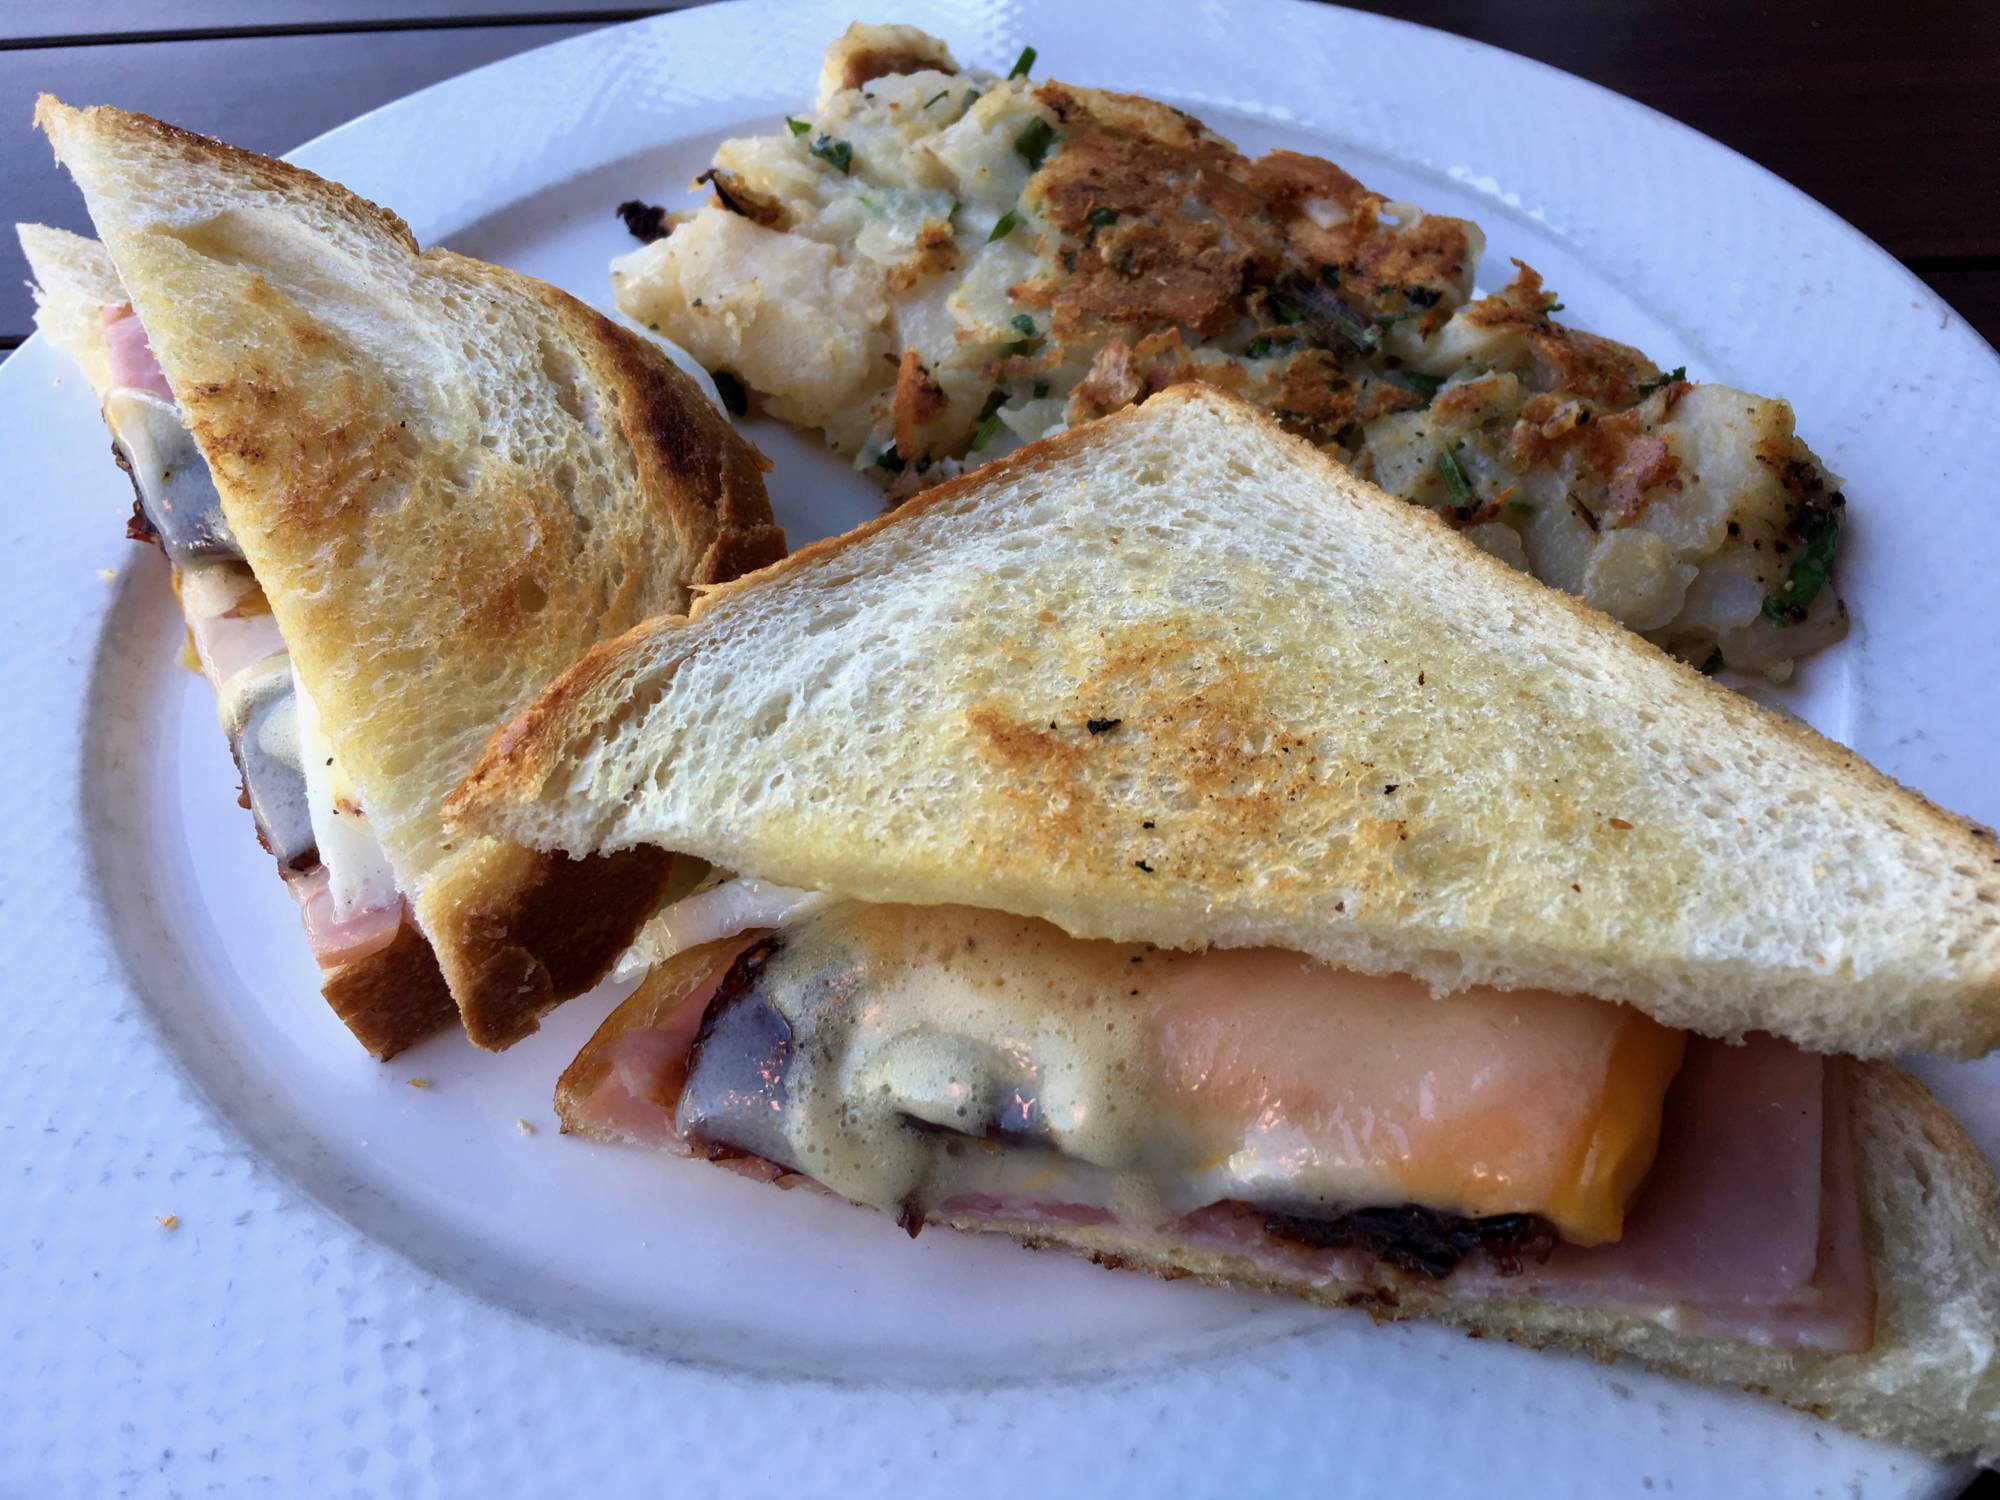 The Ultimate Breakfast Sandwich at Town in San Carlos.